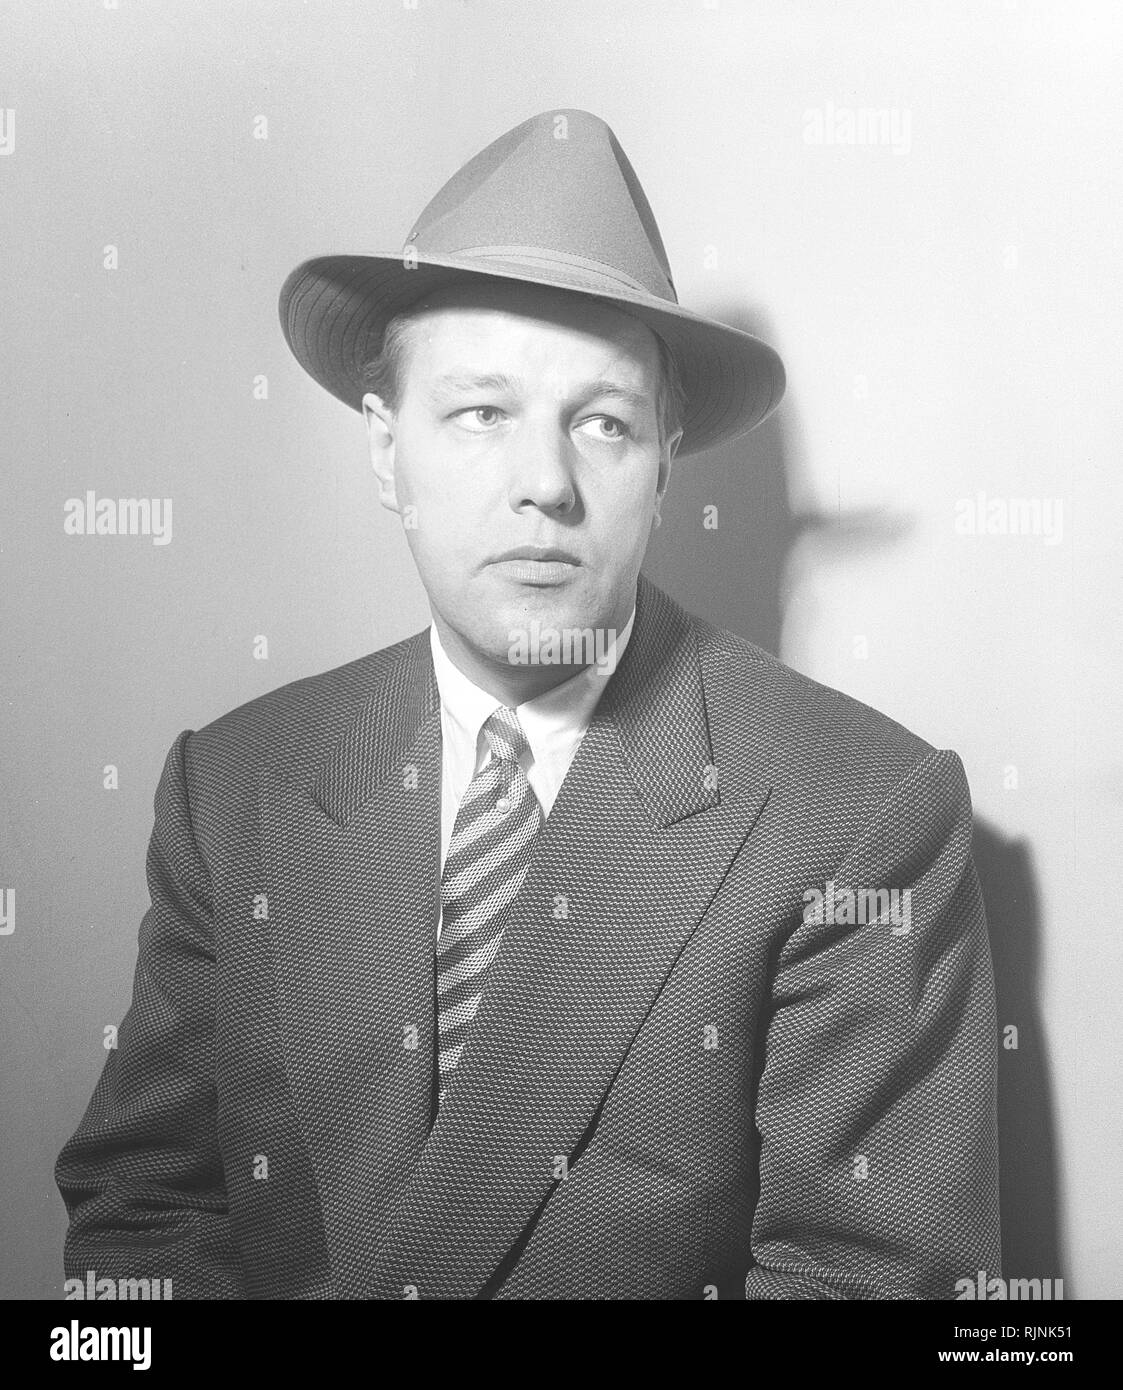 Hat fashion in the 1950s. A man in a suit and tie is wearing a Fedora type hat. A soft brim and typically creased lengthwise, and pinched near the front on both sides. Photo Kristoffersson ref BB91-6 Stock Photo